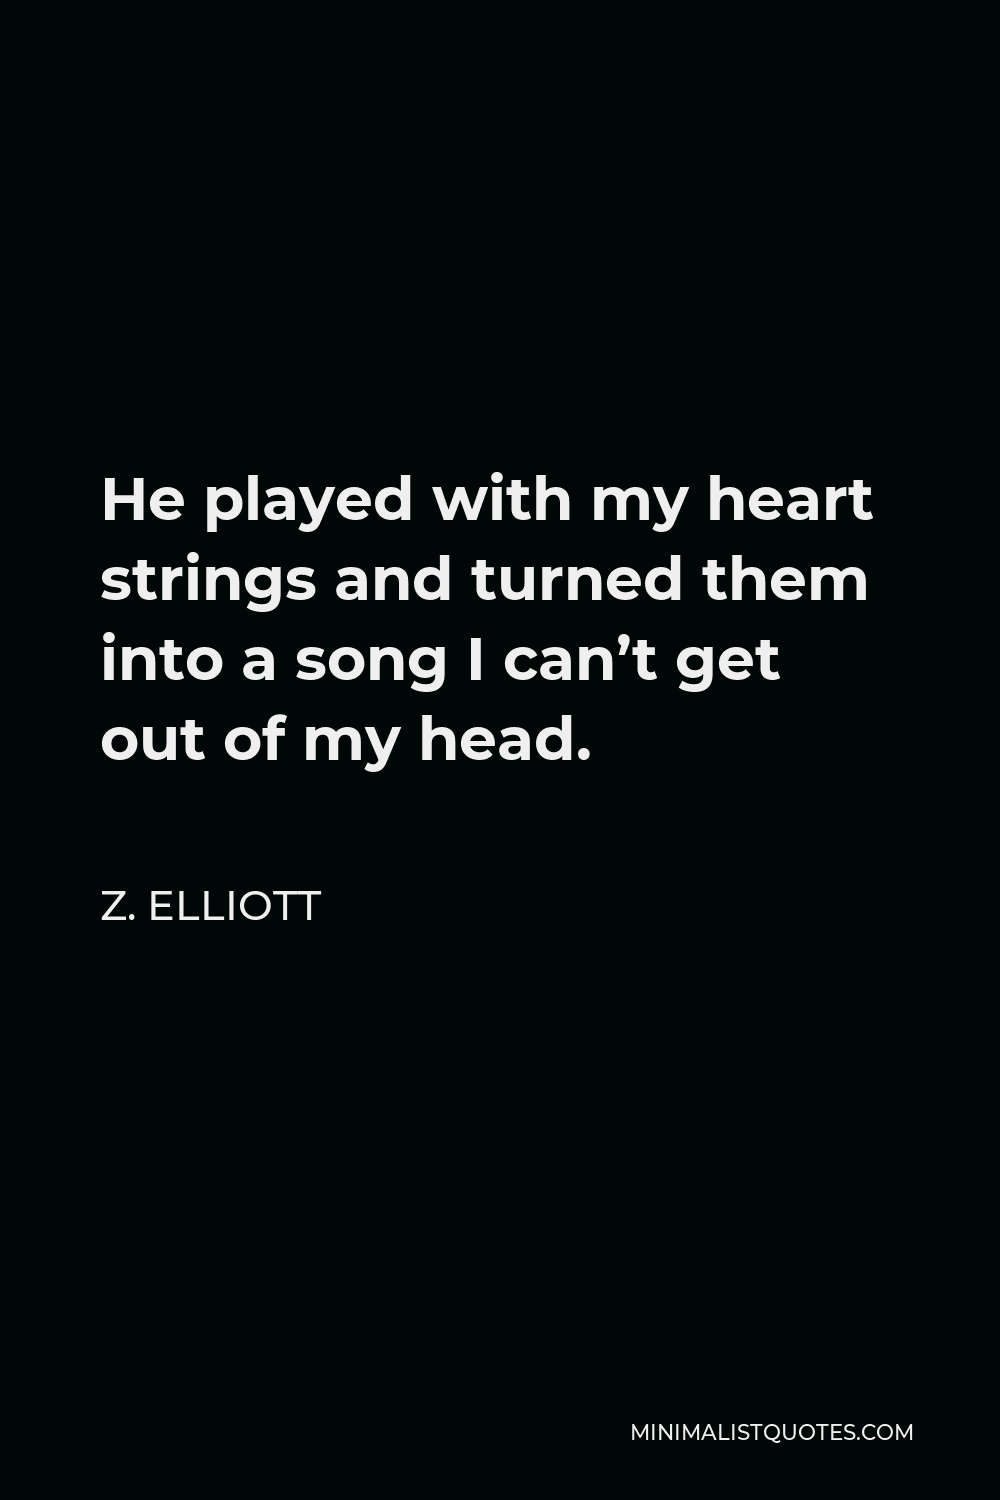 Z. Elliott Quote - He played with my heart strings and turned them into a song I can’t get out of my head.